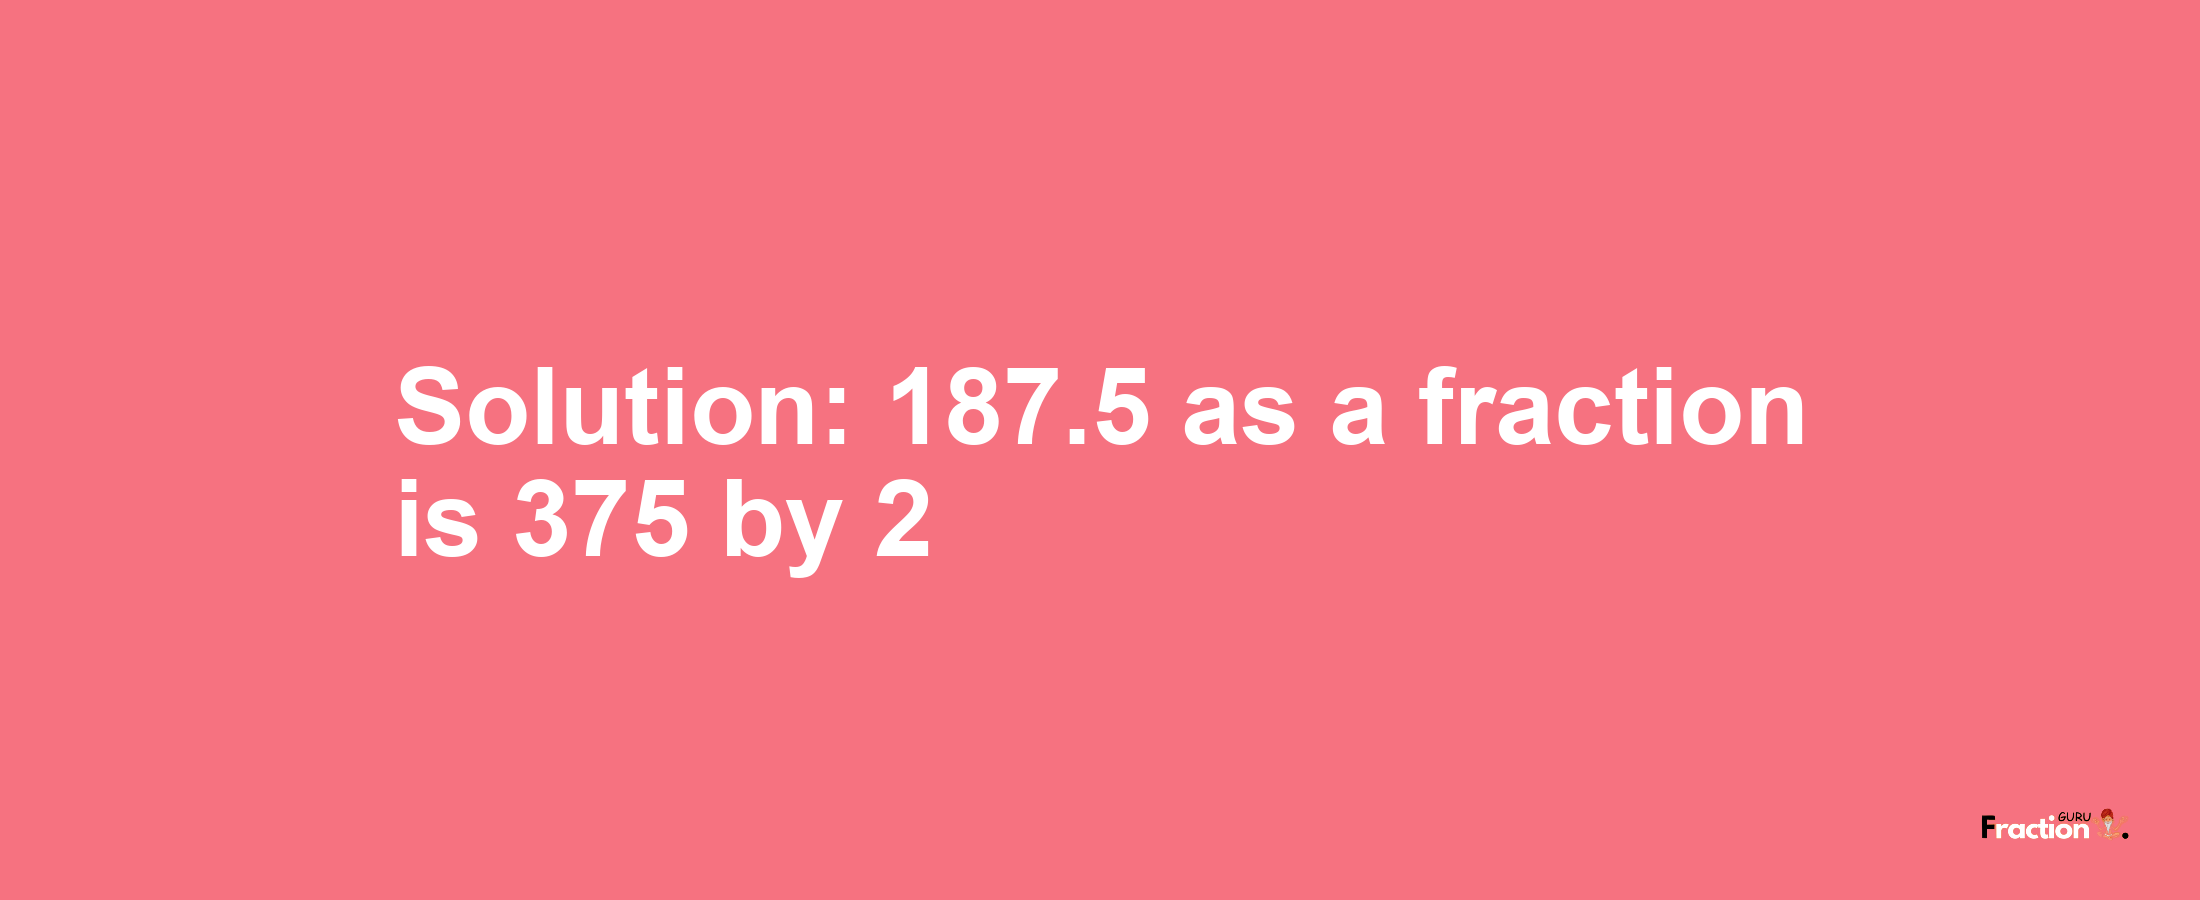 Solution:187.5 as a fraction is 375/2